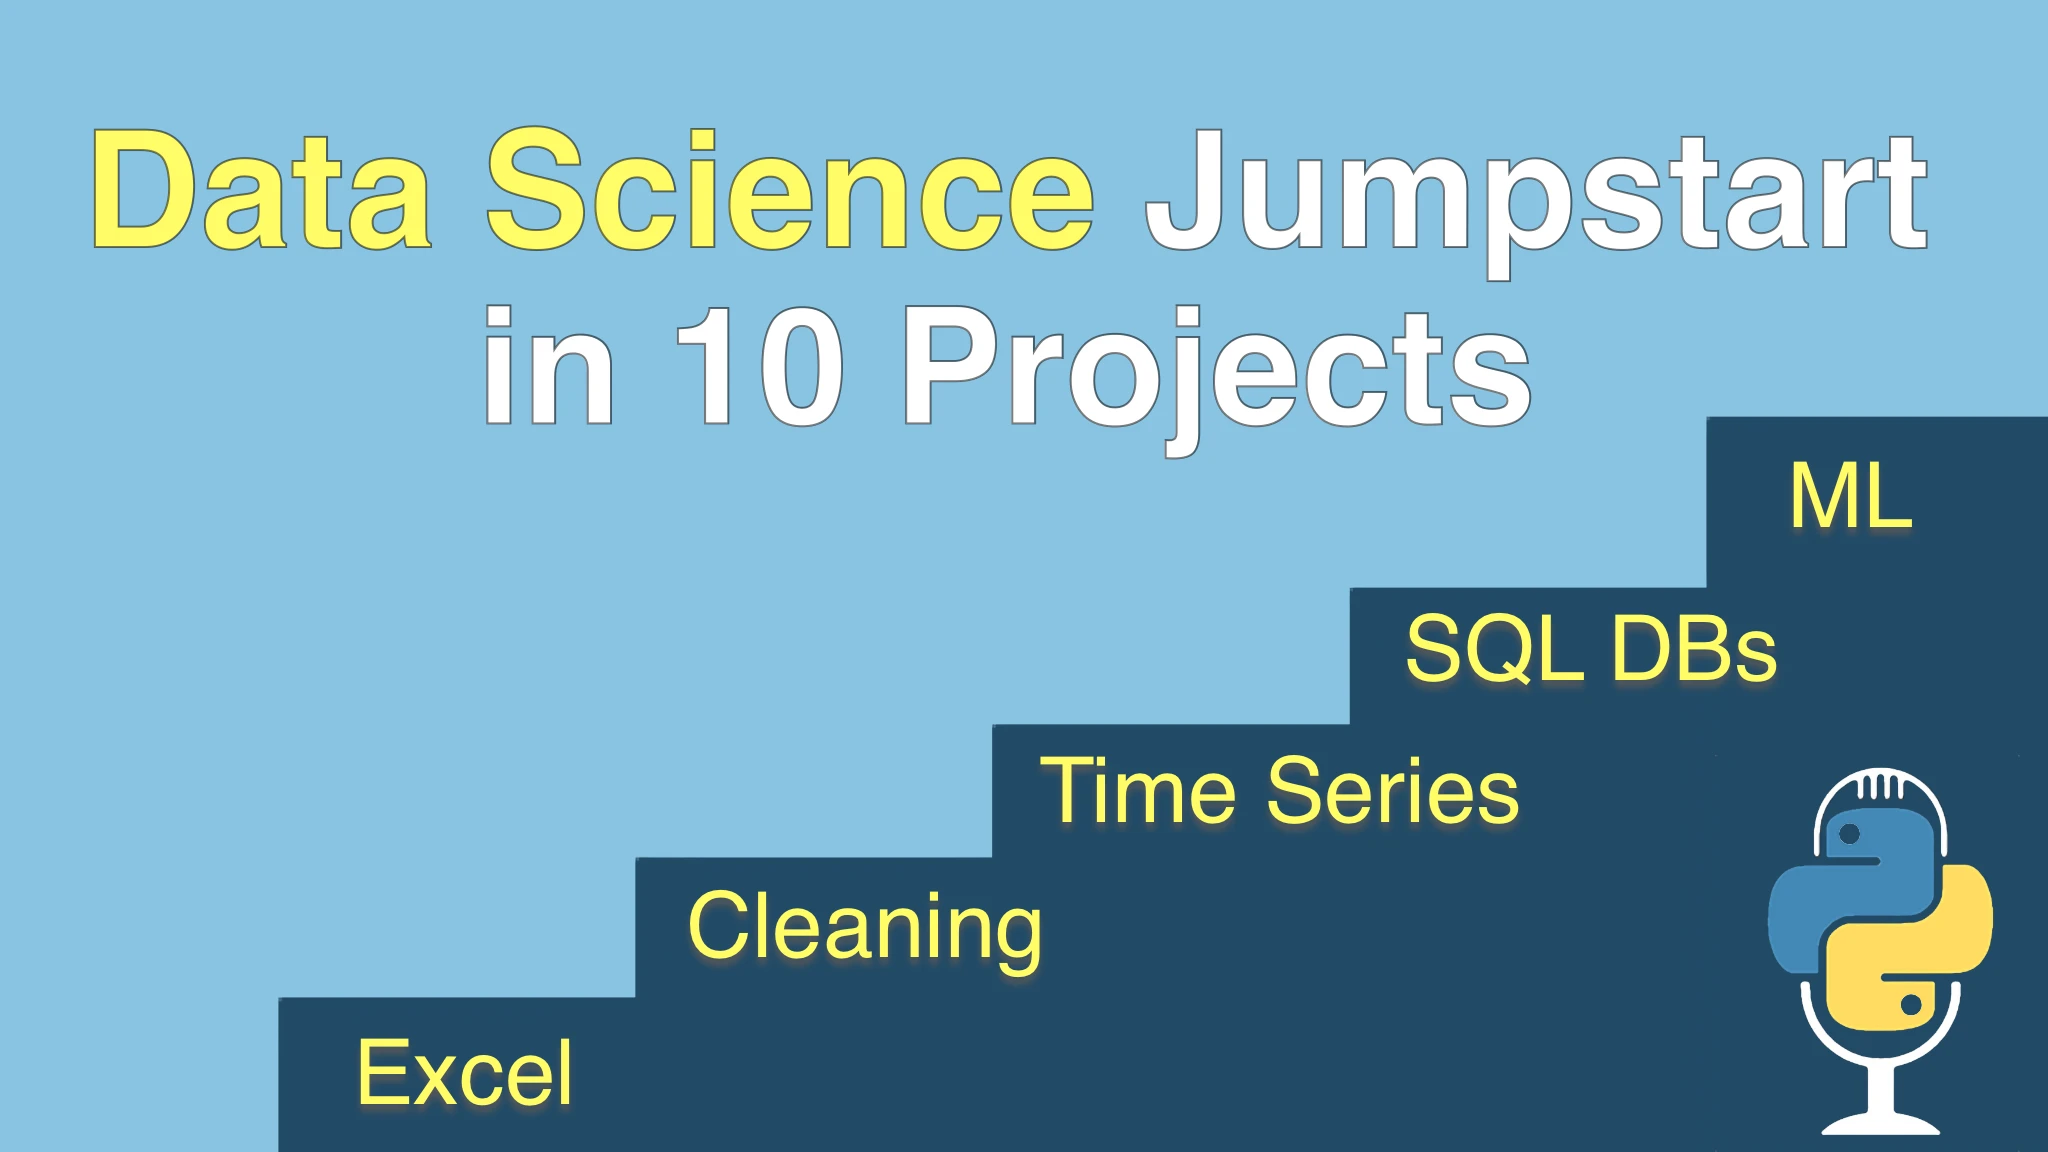 Course: Data Science Jumpstart with 10 Projects